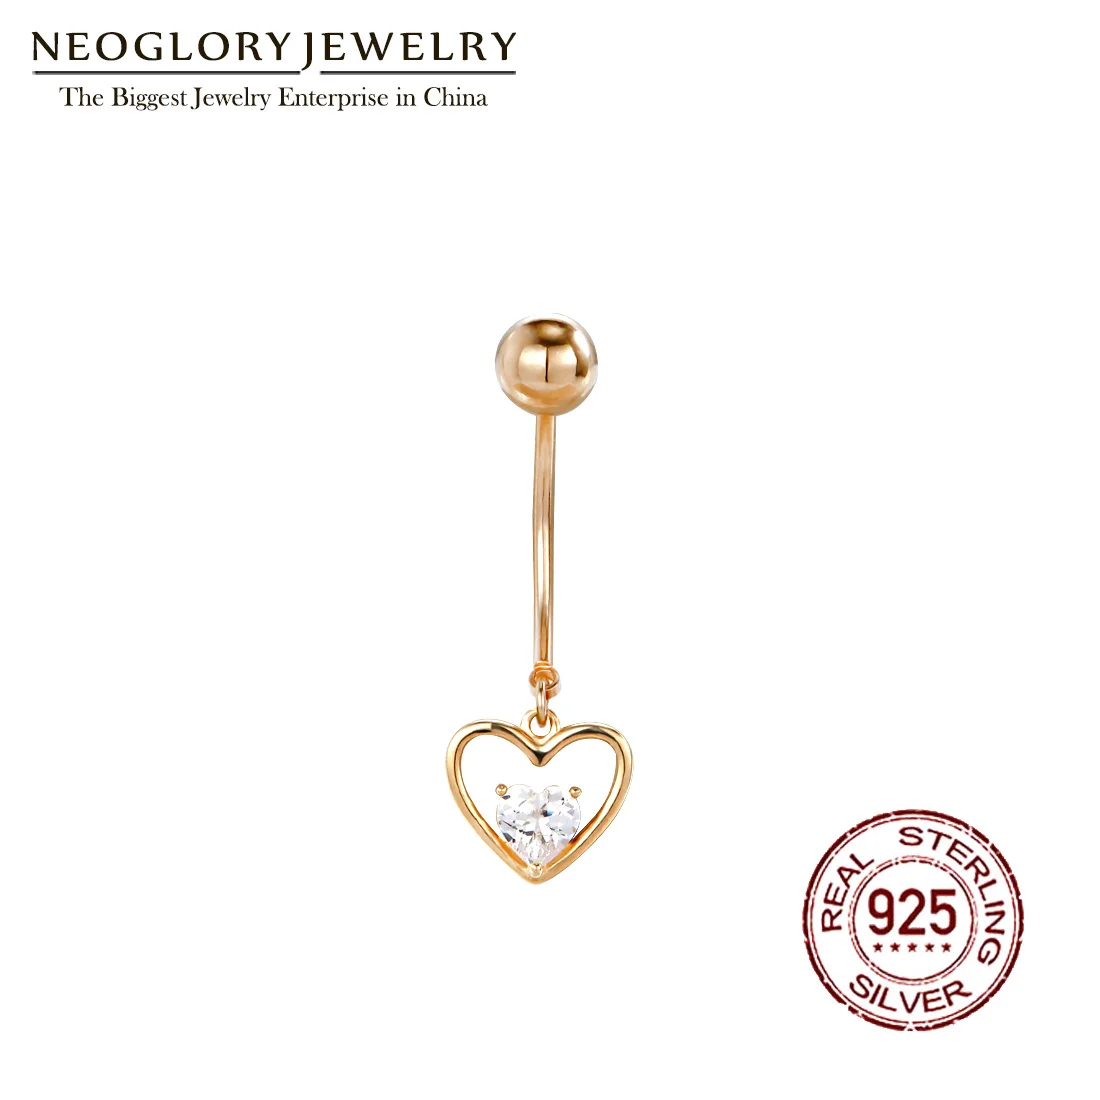 Neoglory S925 Silver Double Heart Zircon Belly Button Ring For Women Body Piercing Delicate White Navel Jewelry New Hot Gift